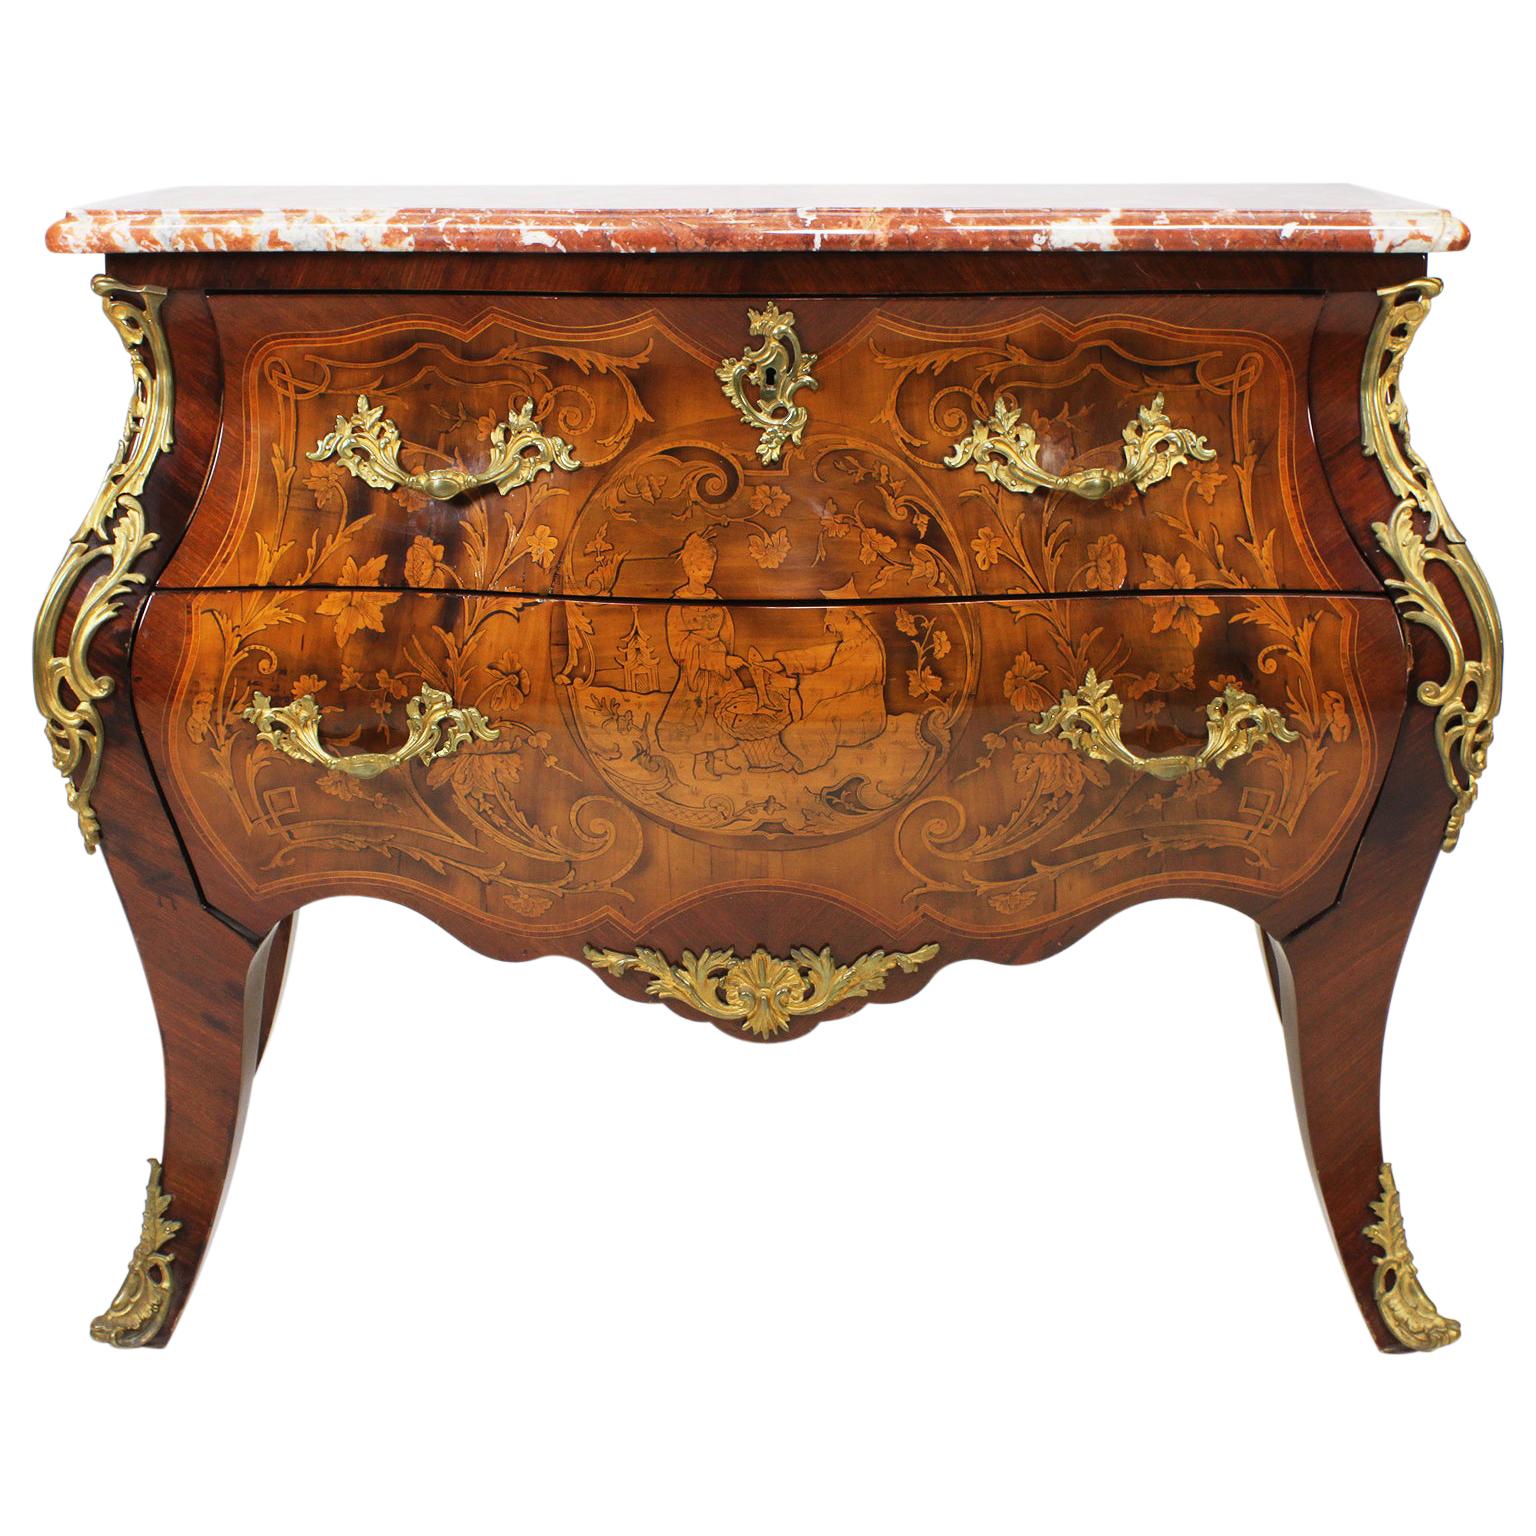 Fine French Louis XV Style Gilt-Bronze & Marquetry Chinoiserie Marquetry Commode